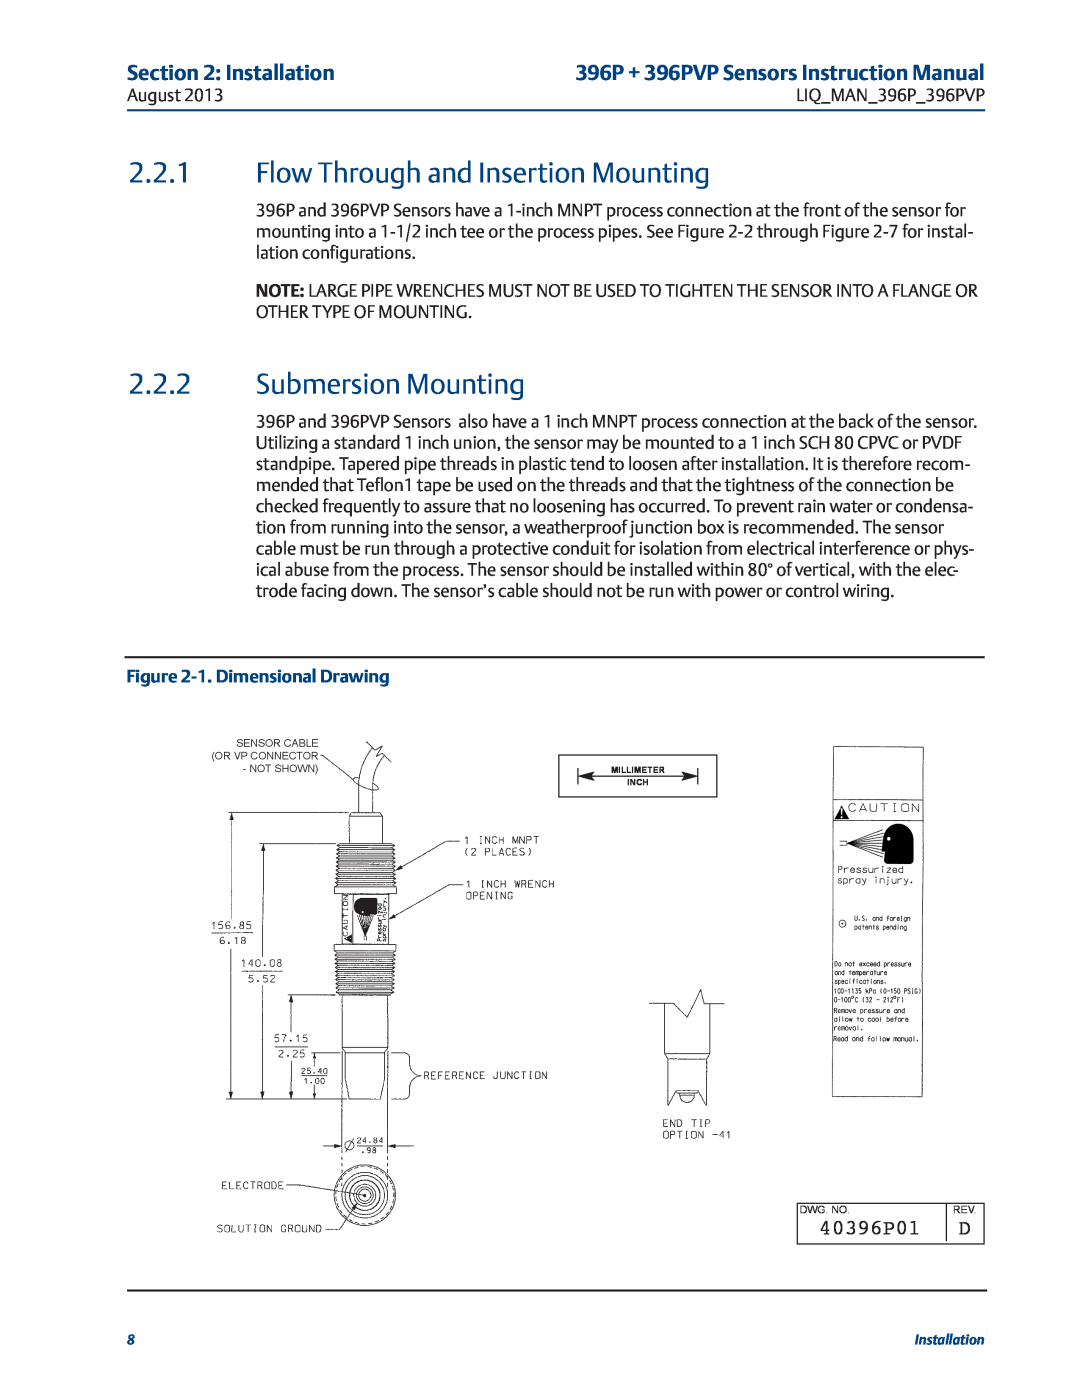 Emerson 396PVP 2.2.1Flow Through and Insertion Mounting, 2.2.2Submersion Mounting, Installation, 40396P01 